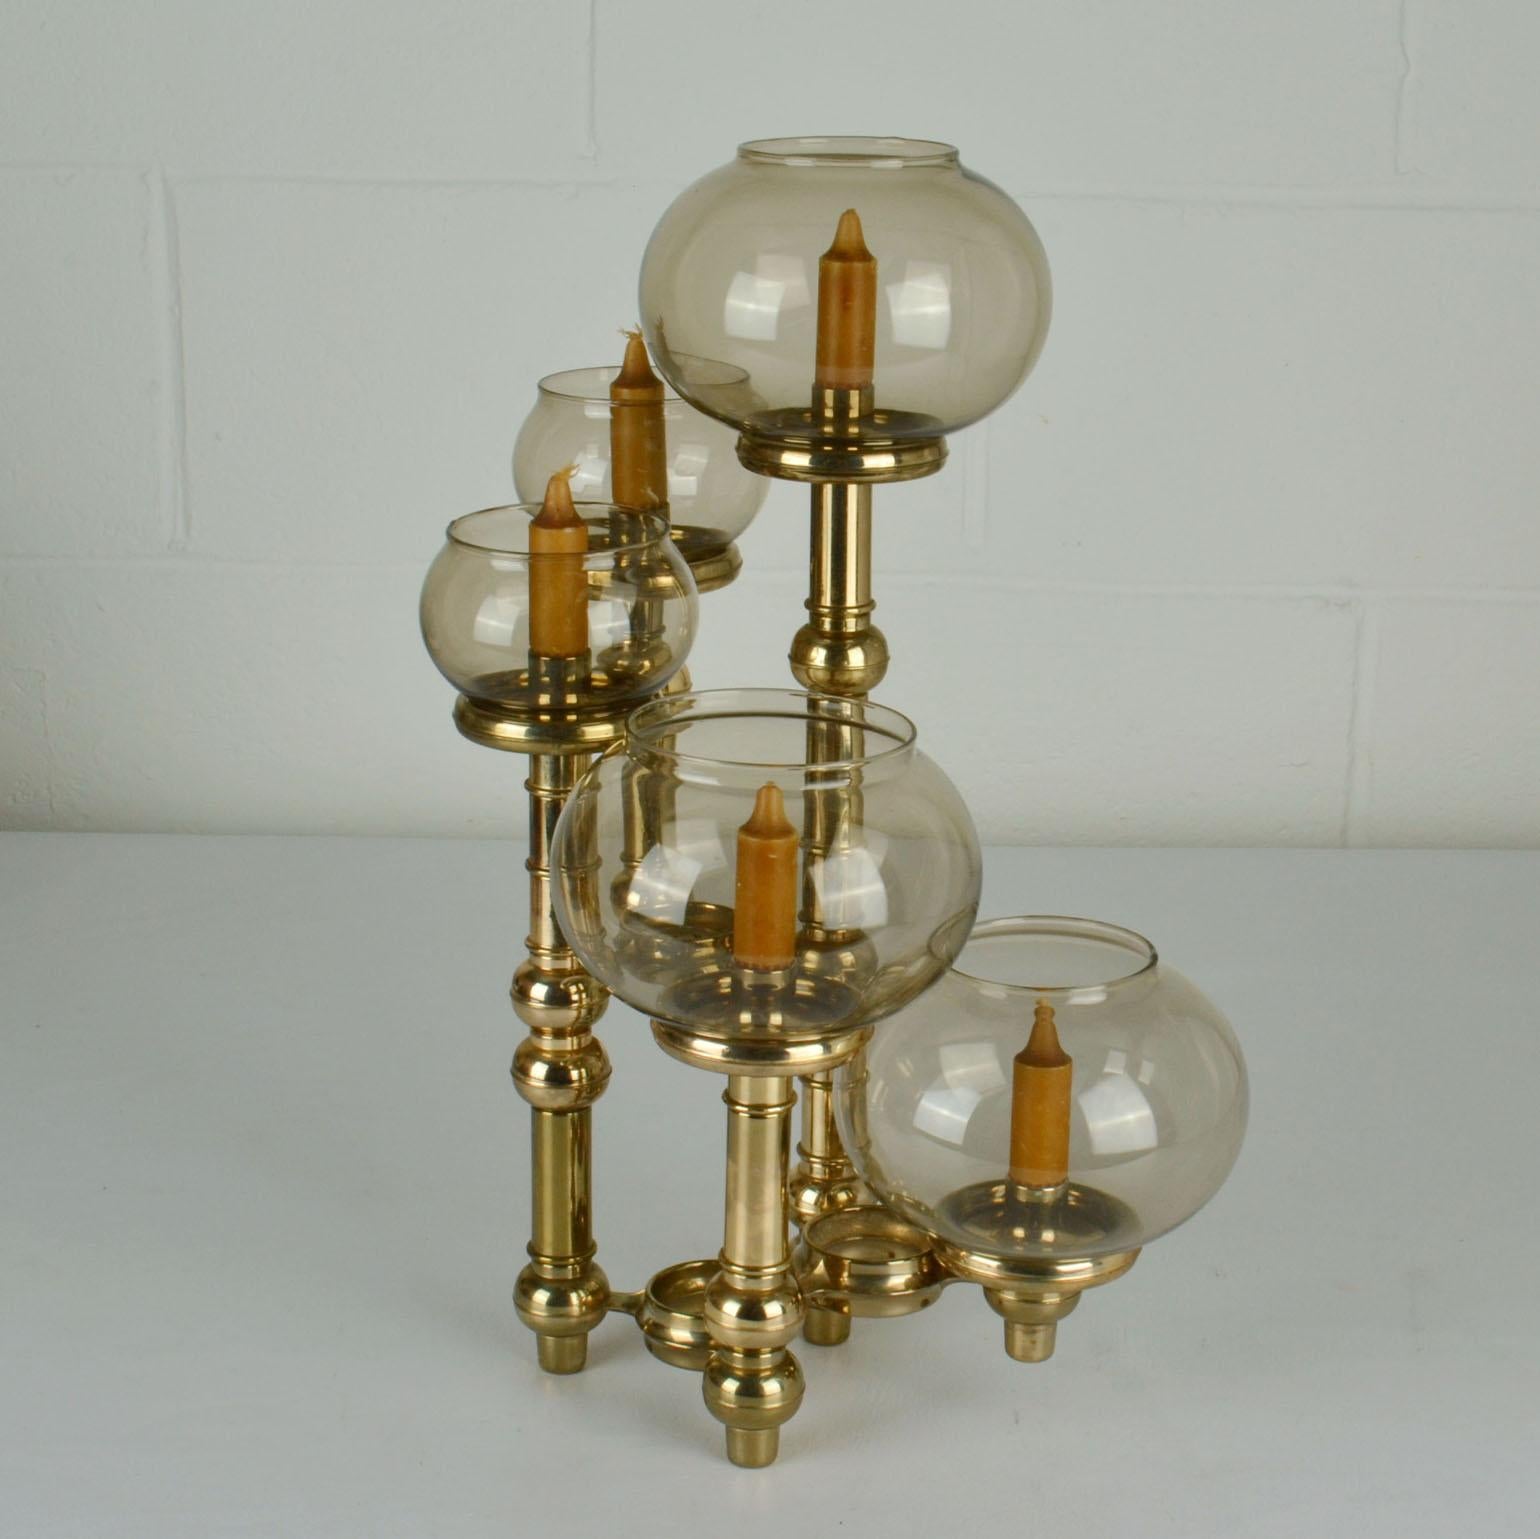 Scandinavian Modern Modular Brass Candelabra with Glass Shades In Excellent Condition For Sale In London, GB